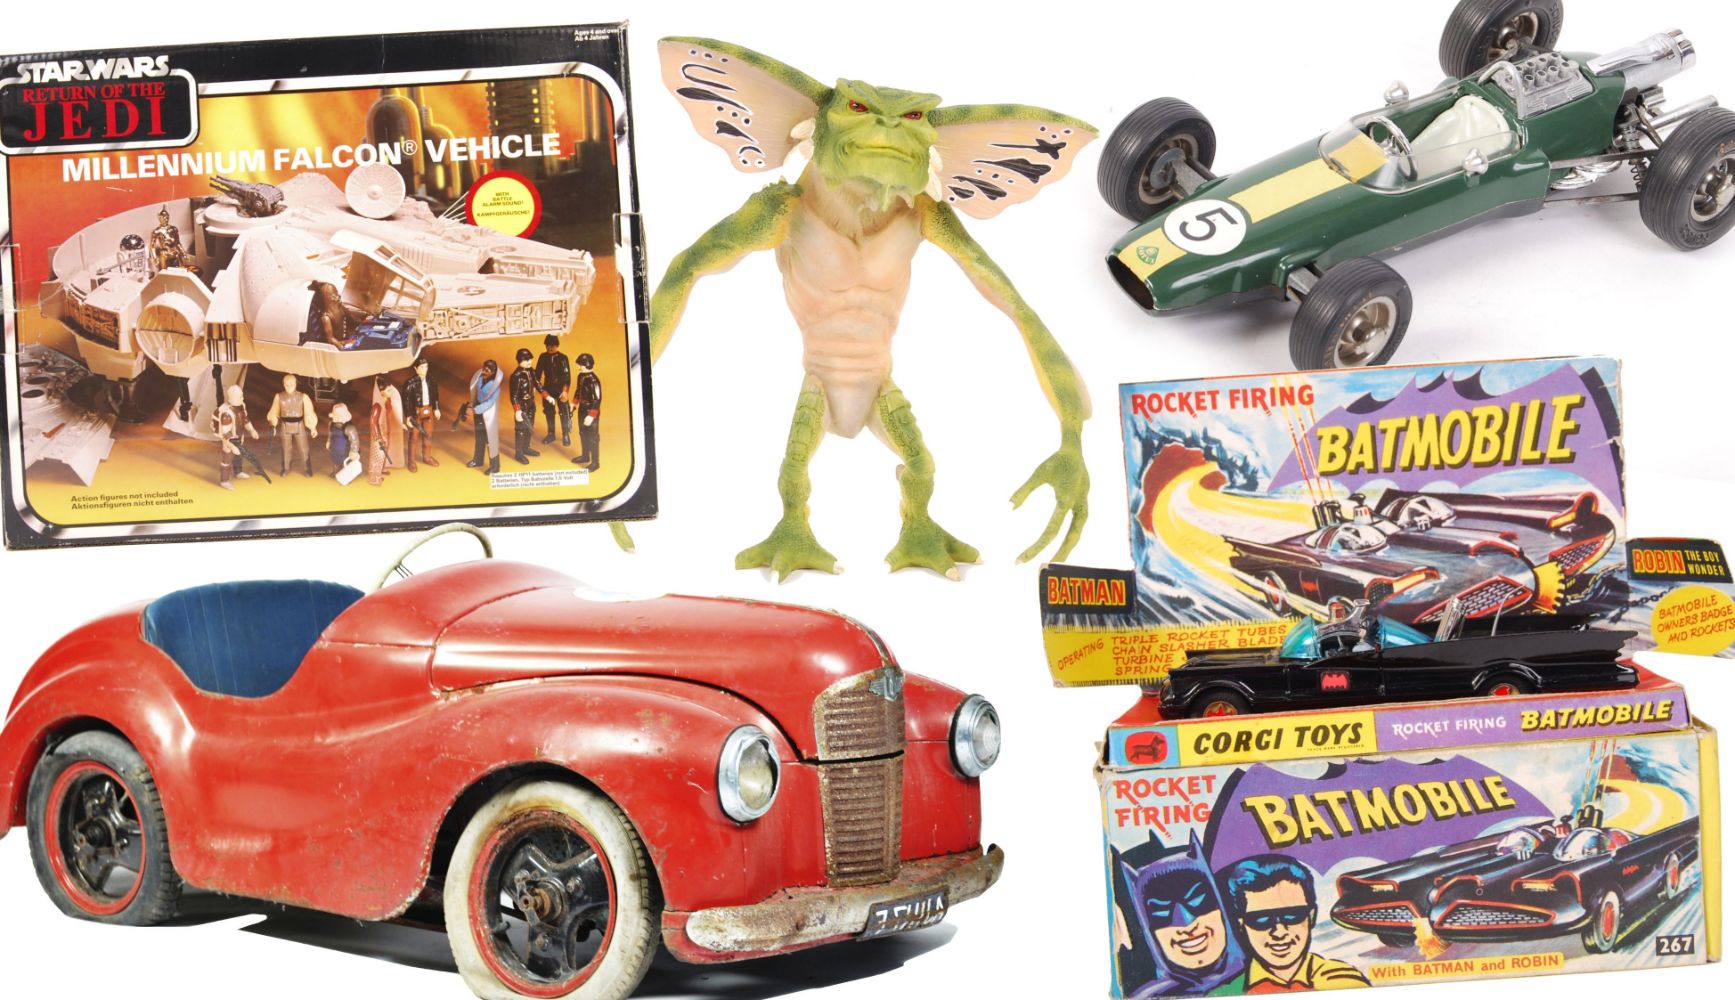 Toy Auction Day Two - Star Wars, Action Figures, Animation Artwork & Retro Gaming